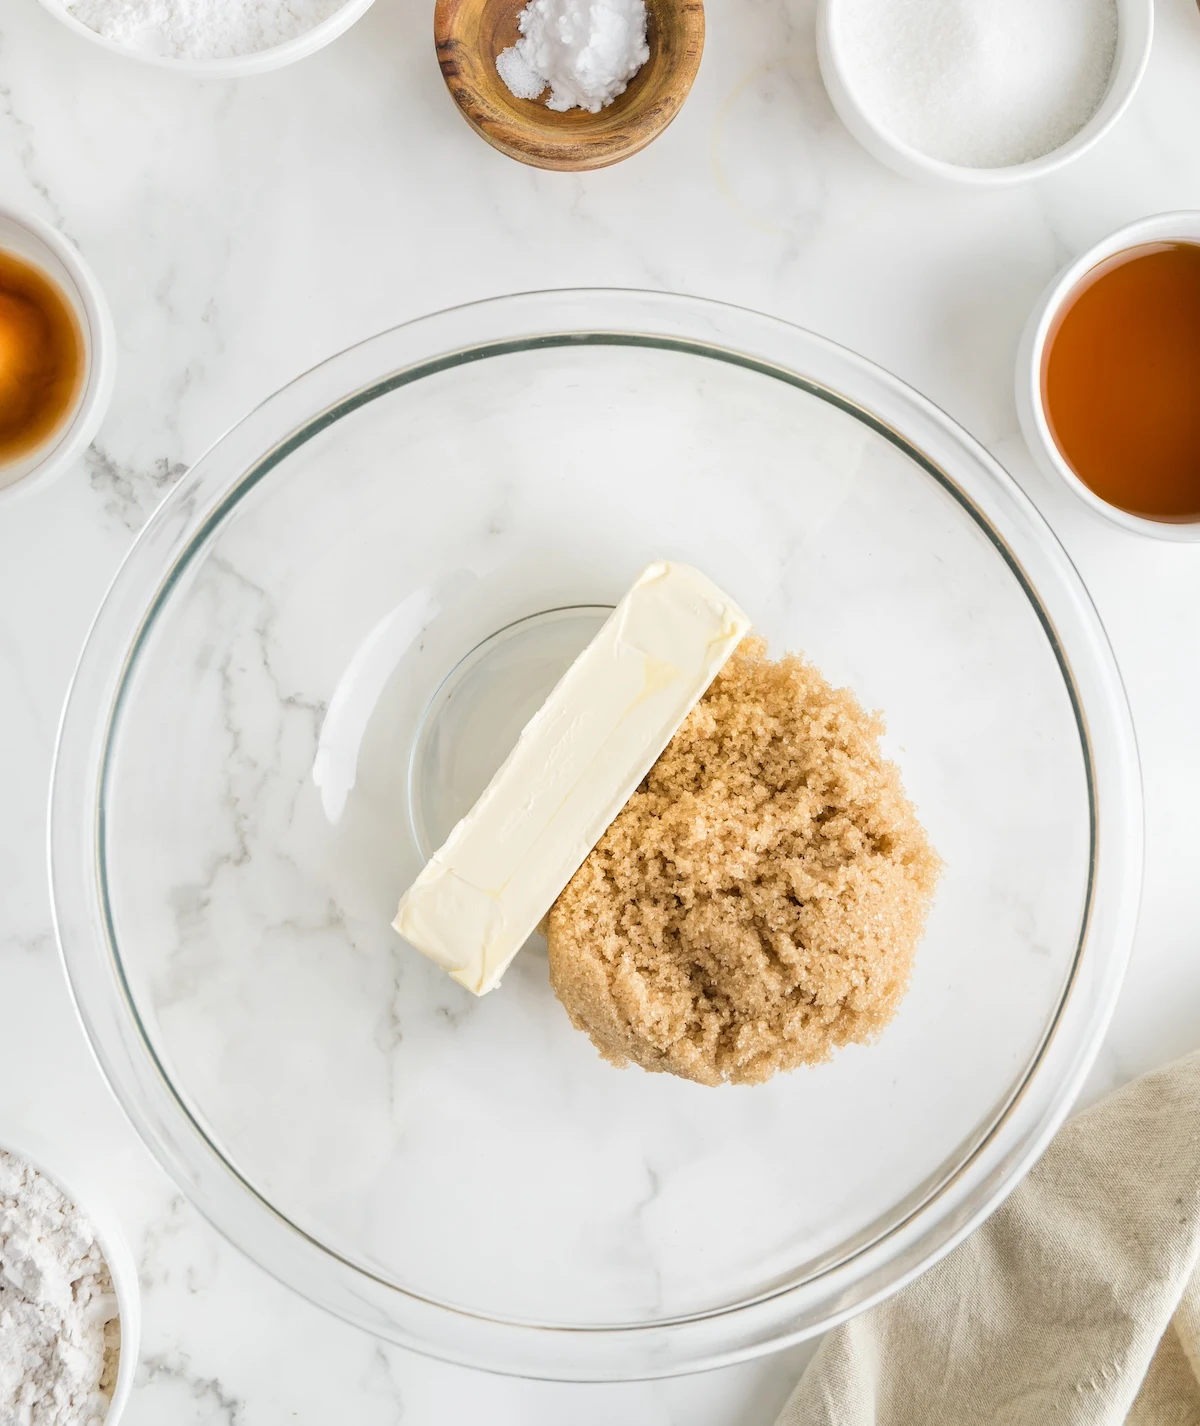 Stick of butter and brown sugar in a clear glass bowl